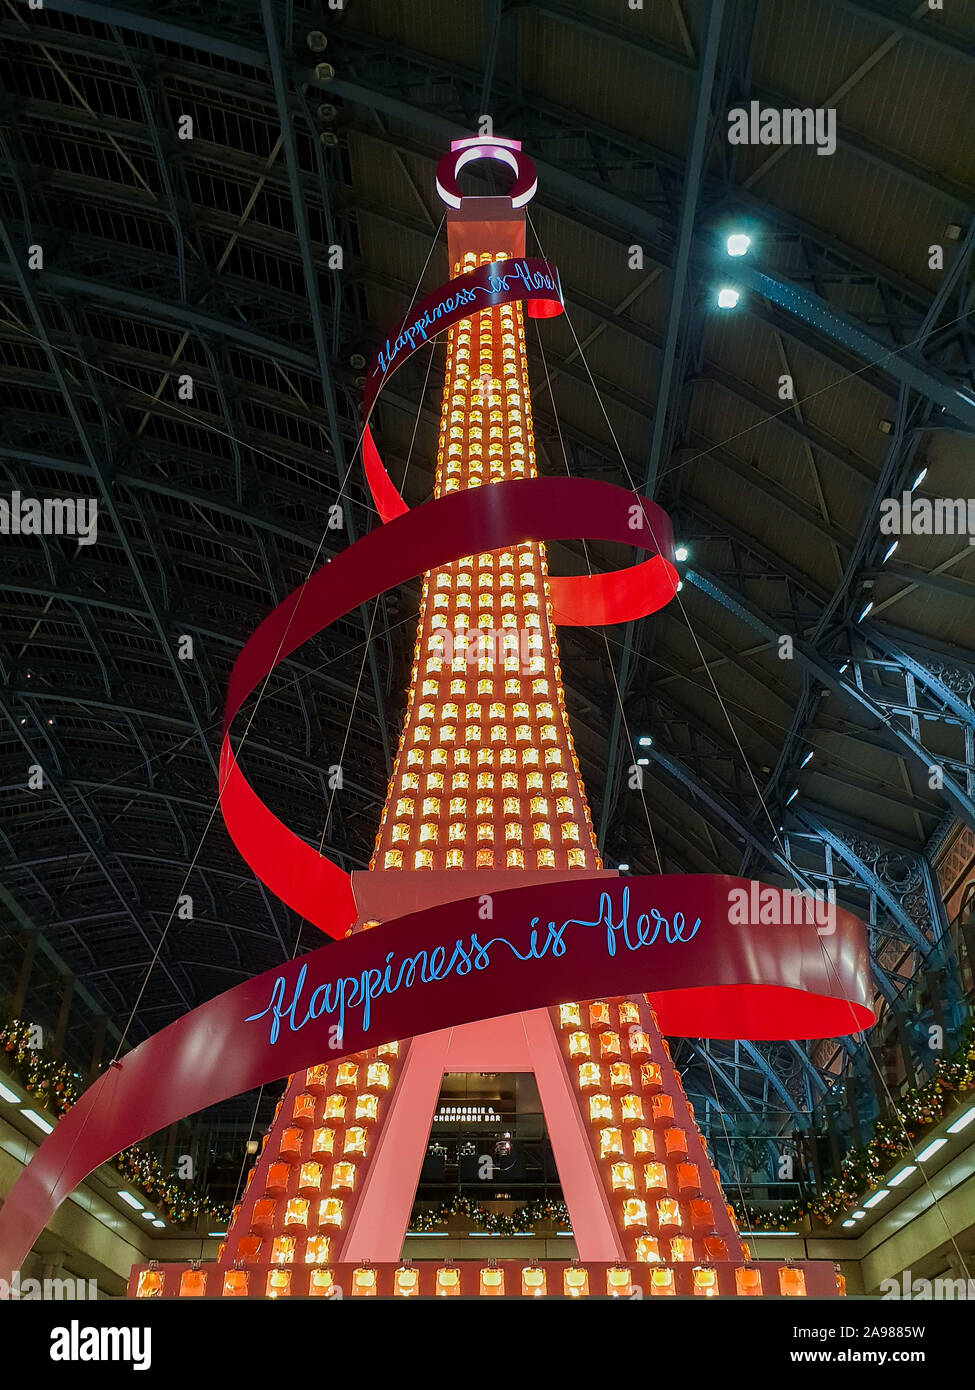 Kings Cross St Pancras. London. UK 13 Nov 2019 - “The Eiffel Tower” installation at Kings Cross St Pancras International rail station. Lancome has teamed up with Kings Cross St Pancras as it unveils its 2019 Christmas installation of Paris’s iconic landmark - The Eiffel Tower. The 36-foot installation embodies the elegance and cheerful spirit of the world’s largest French beauty brand, brightening up the station with Lancôme’s signature pink pantone. Credit: Dinendra Haria/Alamy Live News Stock Photo